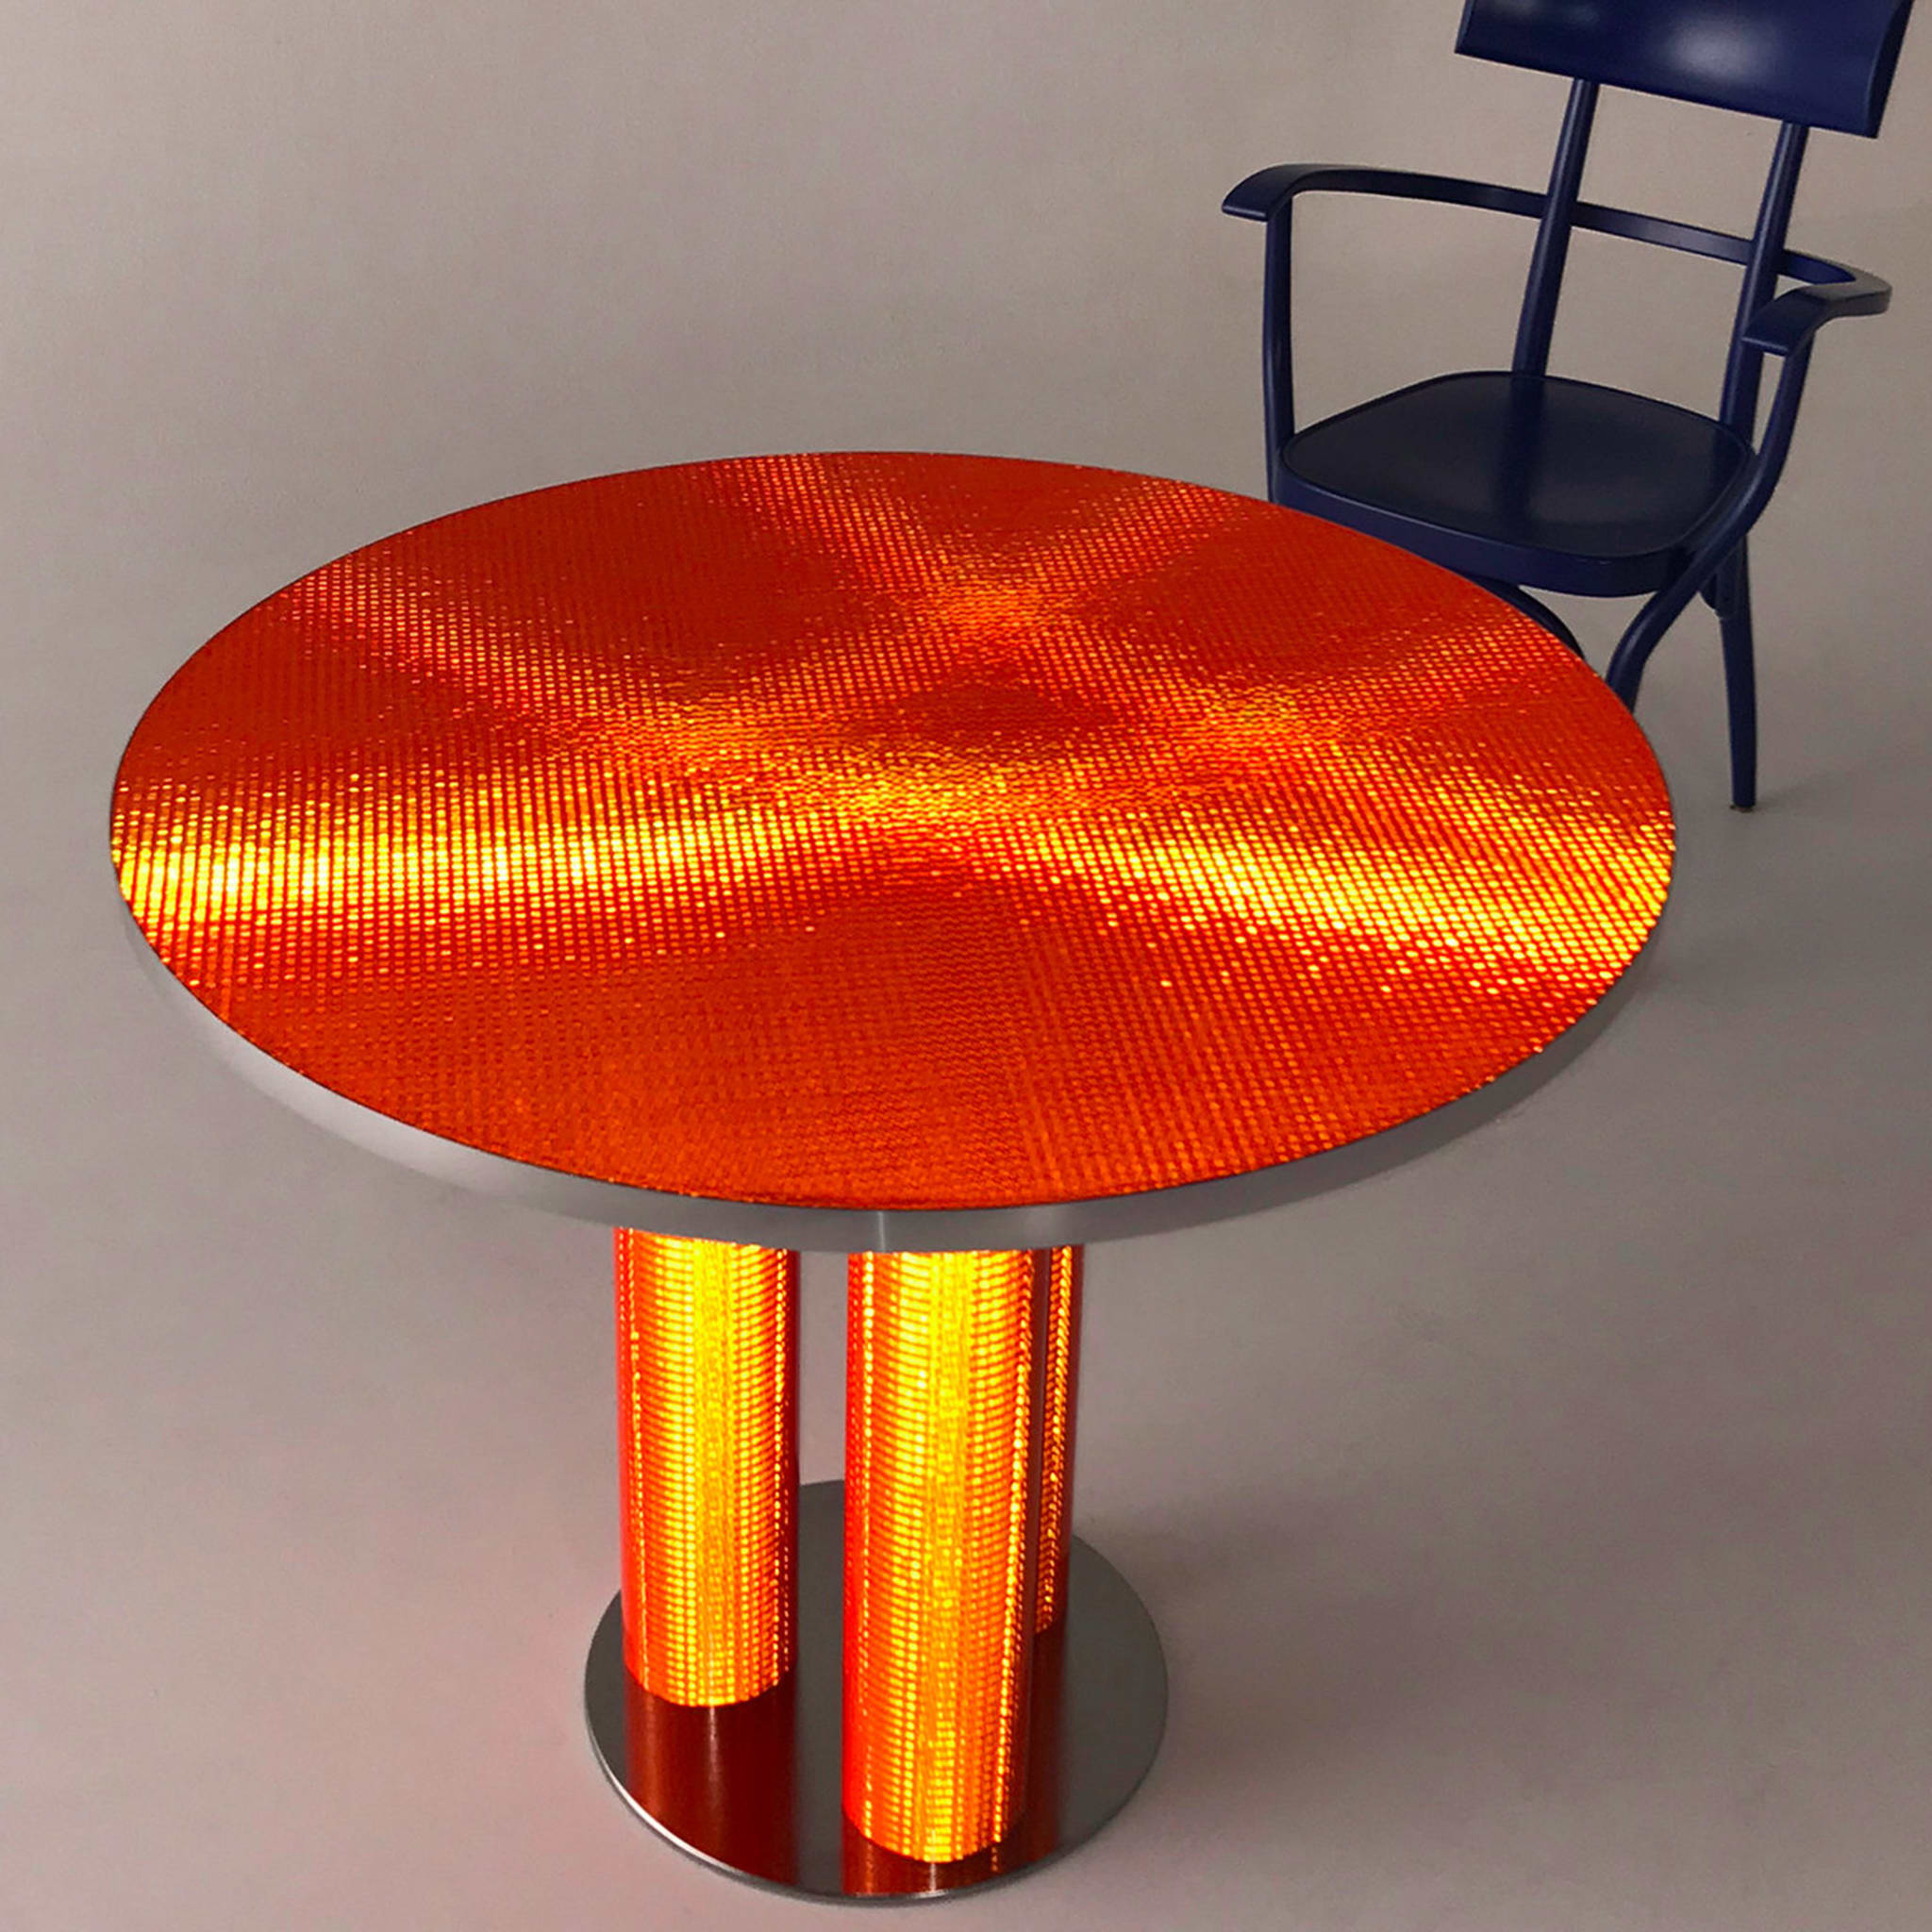 Reflective Collection - round Bistro table - Alternative view 3